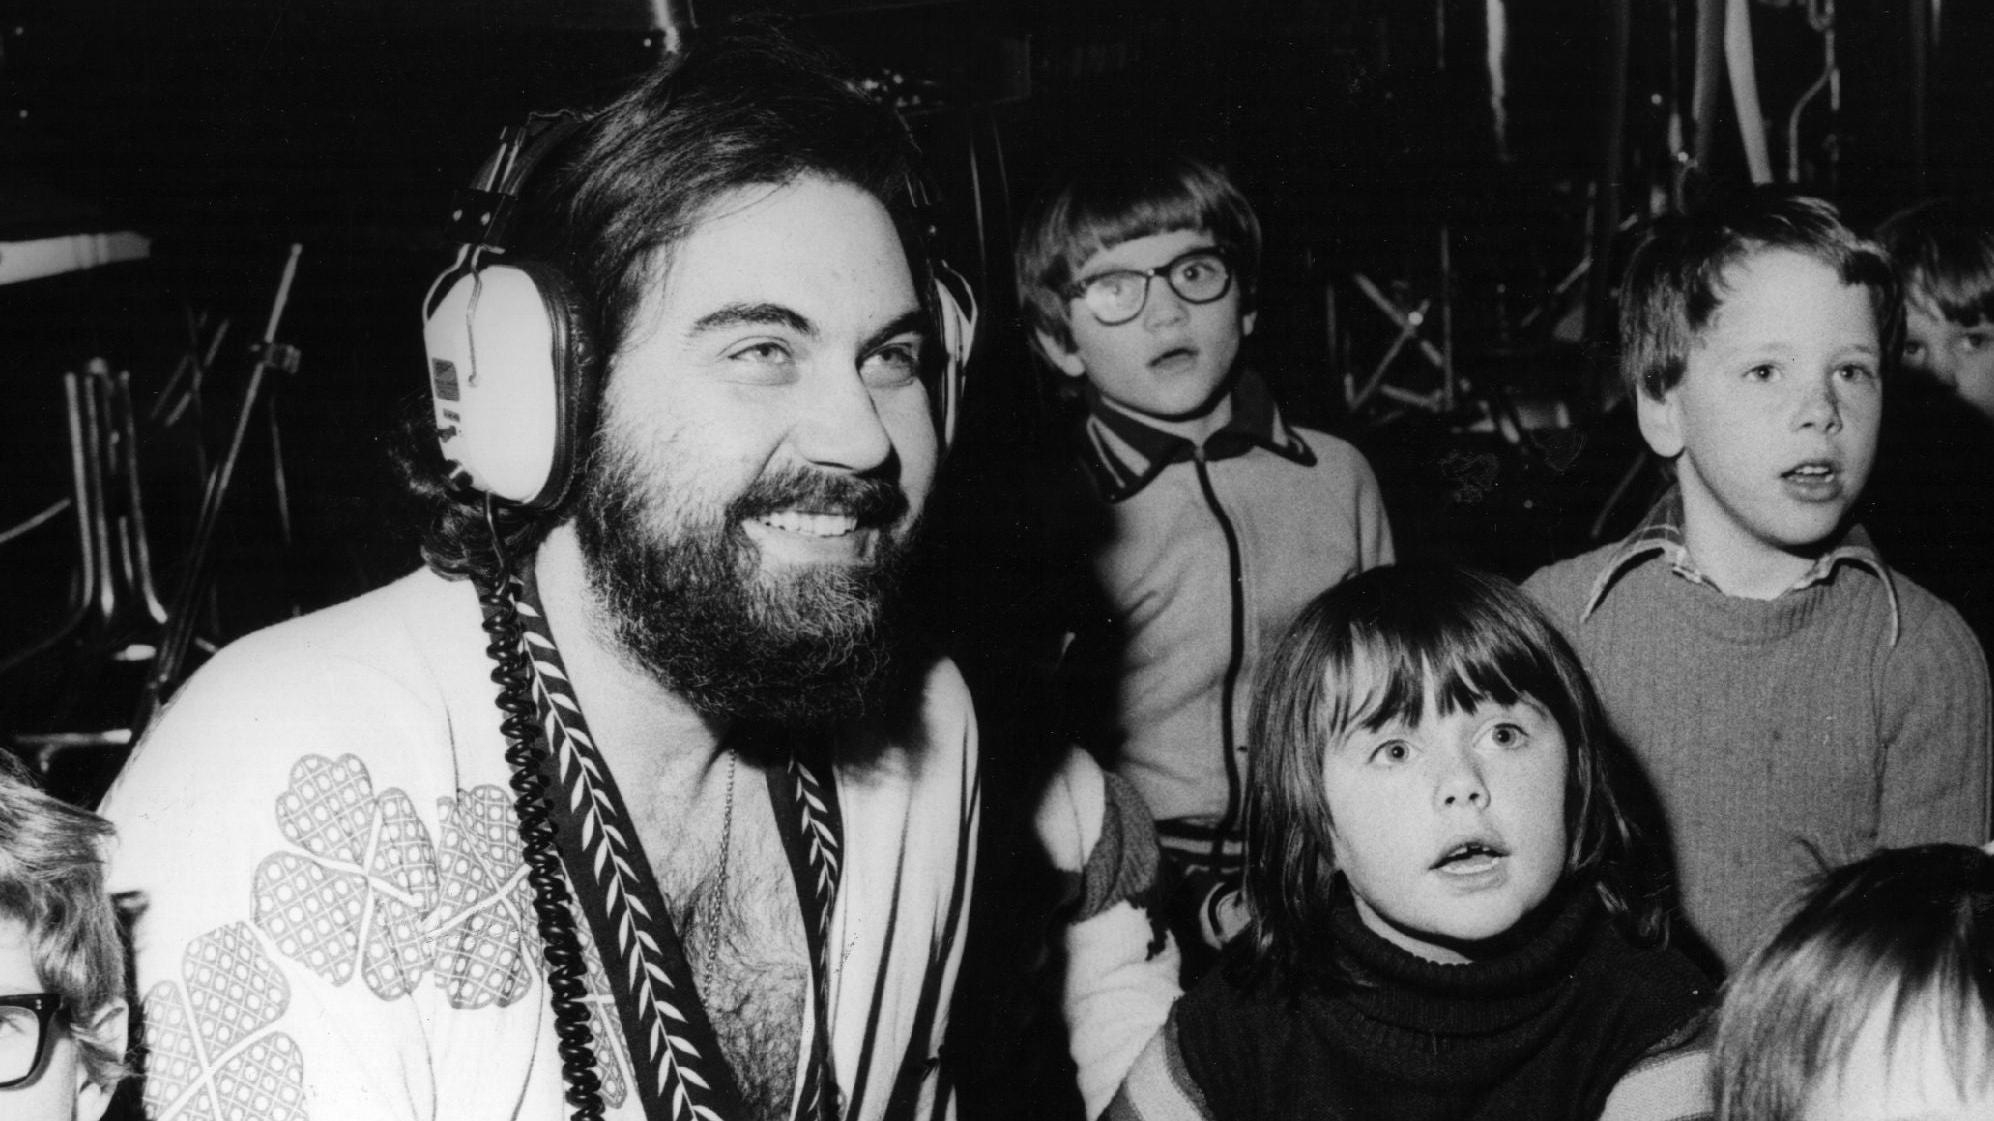 R.I.P. Vangelis, legendary composer behind Blade Runner and Chariots Of Fire